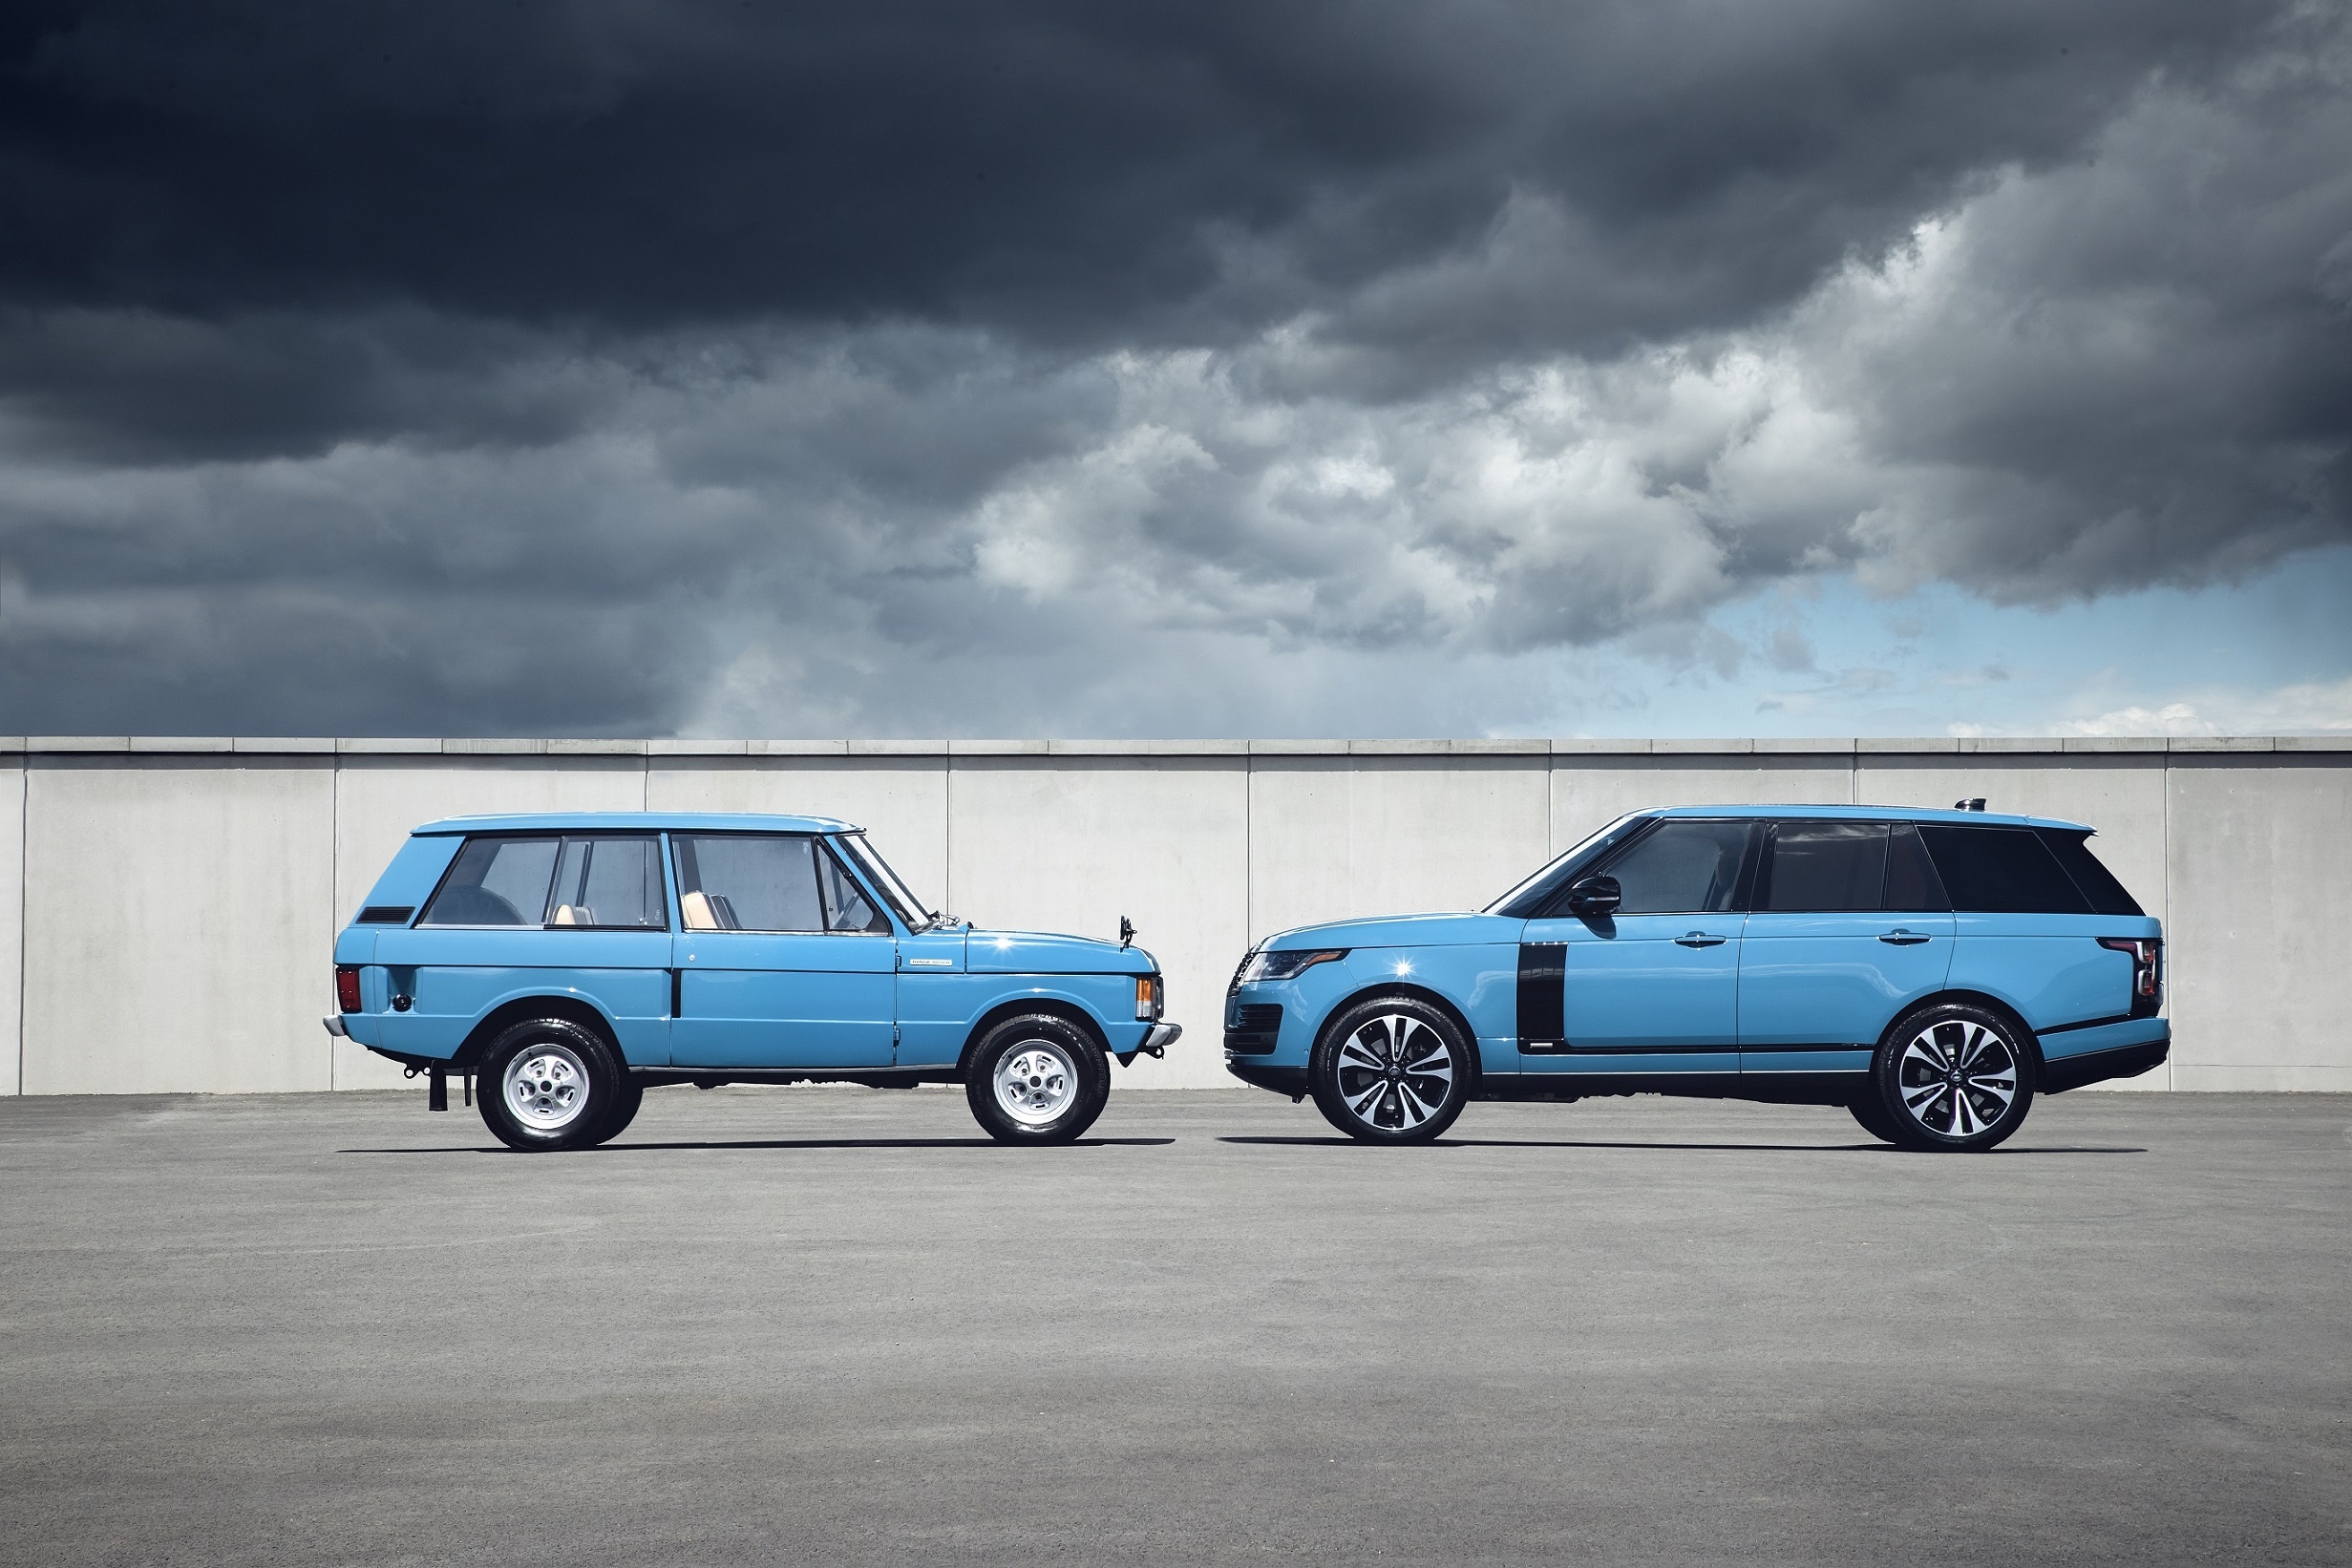 RANGE ROVER MARKS 50 YEARS OF ALL-TERRAIN INNOVATION AND LUXURY WITH EXCLUSIVE NEW LIMITED EDITION